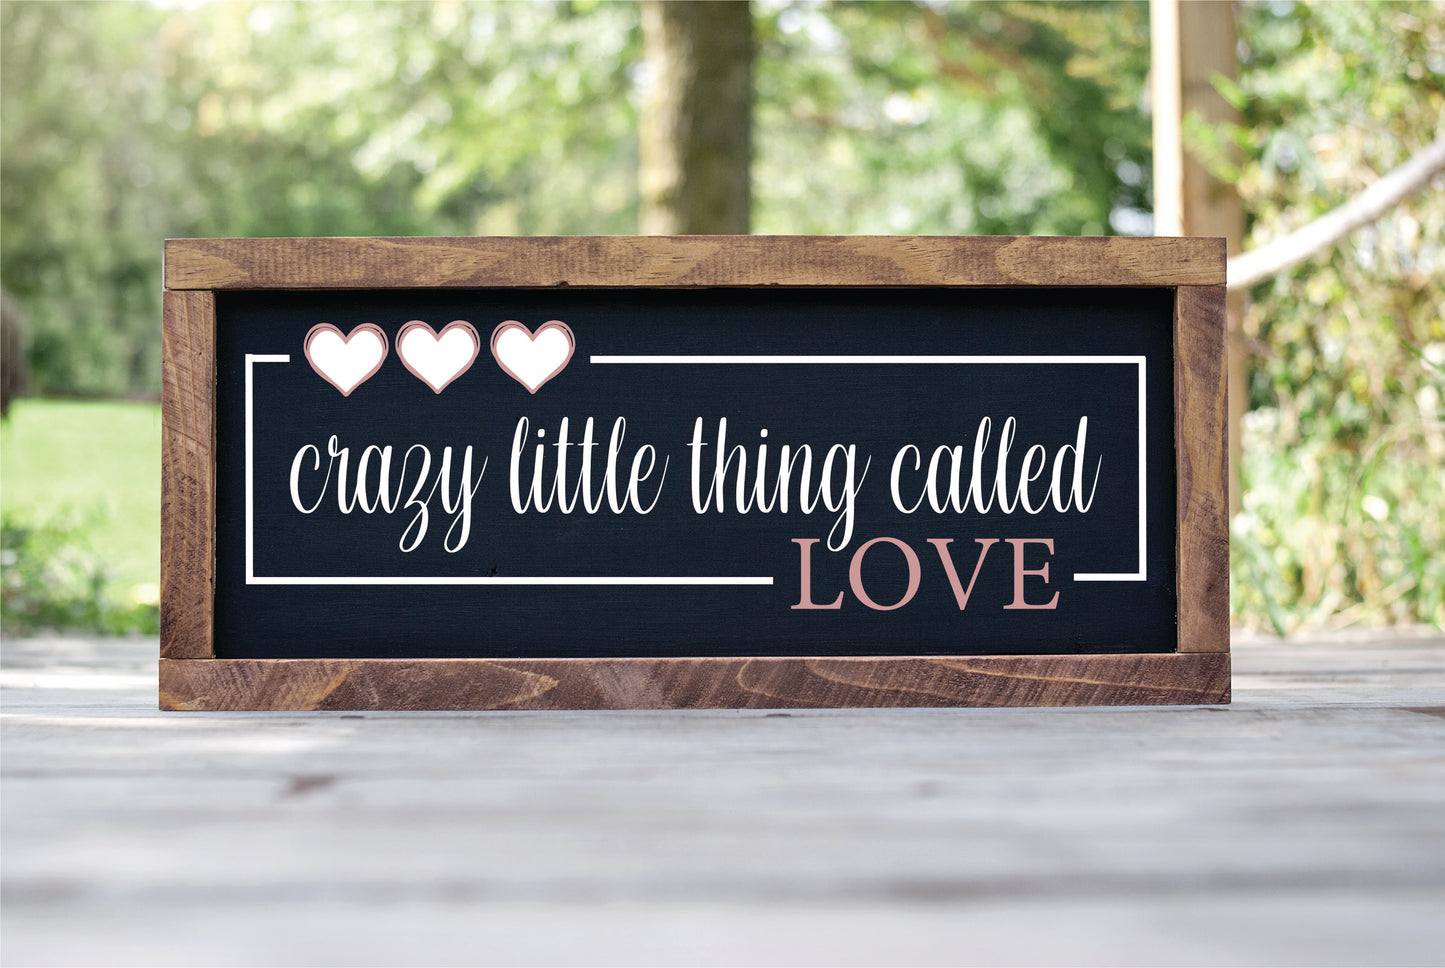 crazy little thing called love | Valentine's Day | Décor